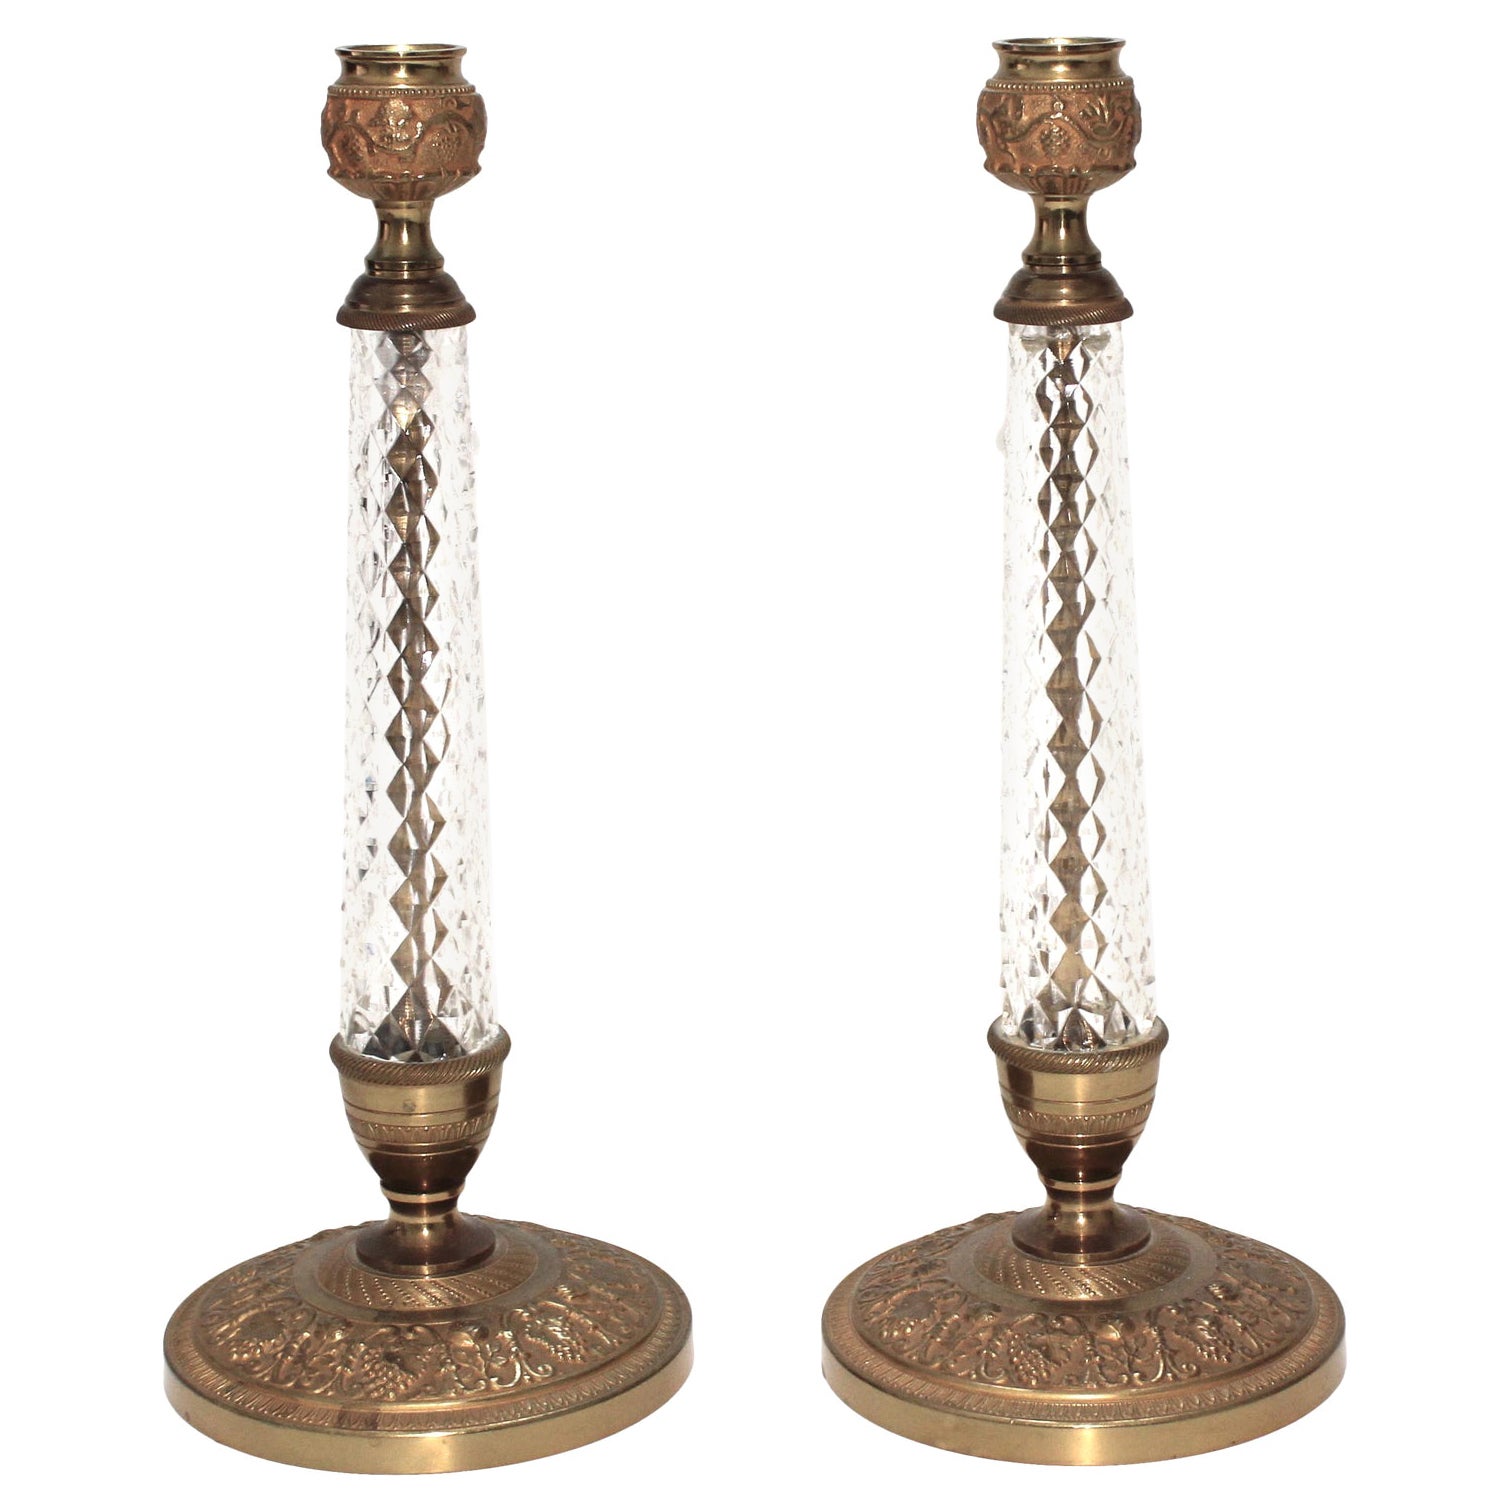 Pair of Crystal Candlesticks by Cristalleries de Sevres